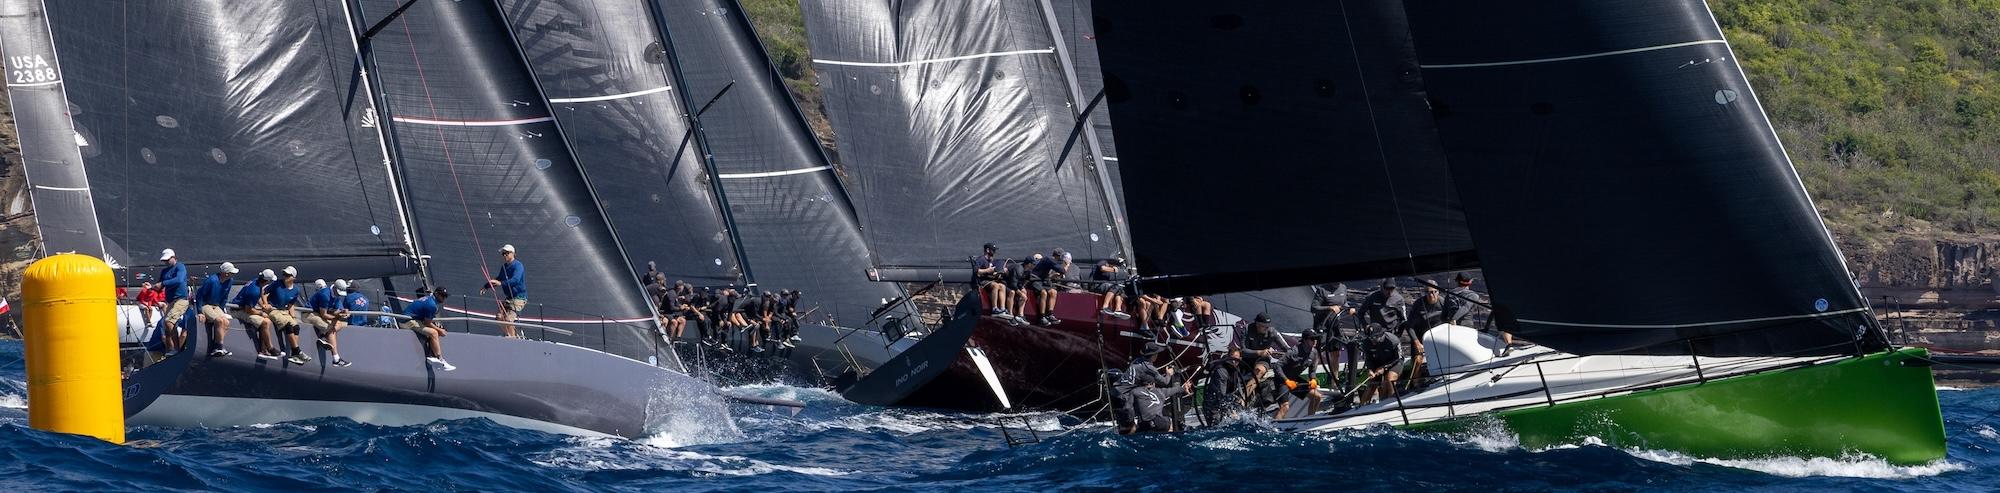 The RORC Nelson’s Cup Series kicked off today with two superb races starting off Fort Charlotte, Antigua. Race results were decided by very close margins. Two teams remain unbeaten in the RORC Nelson’s Cup Series: Wendy Schmidt’s Botin 85 Deep Blue (USA) and Frederic Puzin’s Ker 46 Daguet 3 (FRA). RP37 Warthog (ANT), skippered by Jules Mitchell with an all-Antiguan crew, leads IRC Two on countback from Ed Bell’s Dawn Treader.